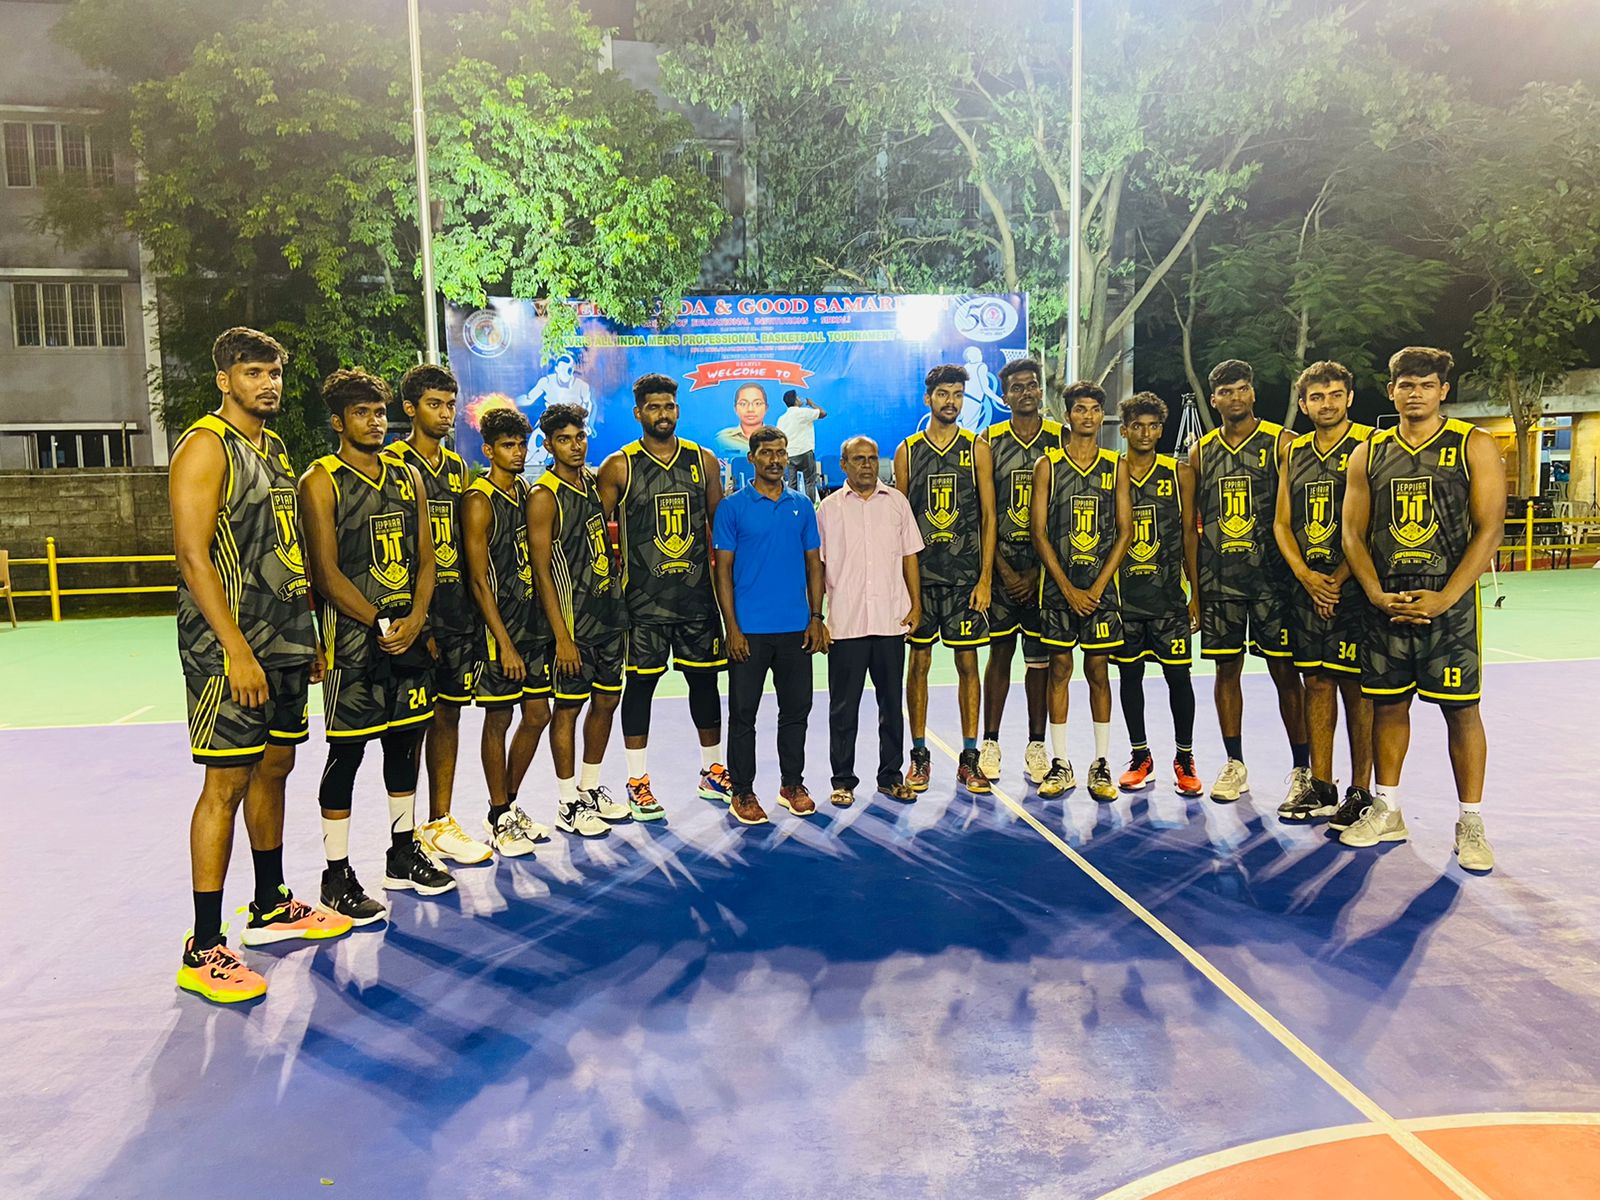 KVR’S All India Men’s Professional Basketball Tournament – 2022